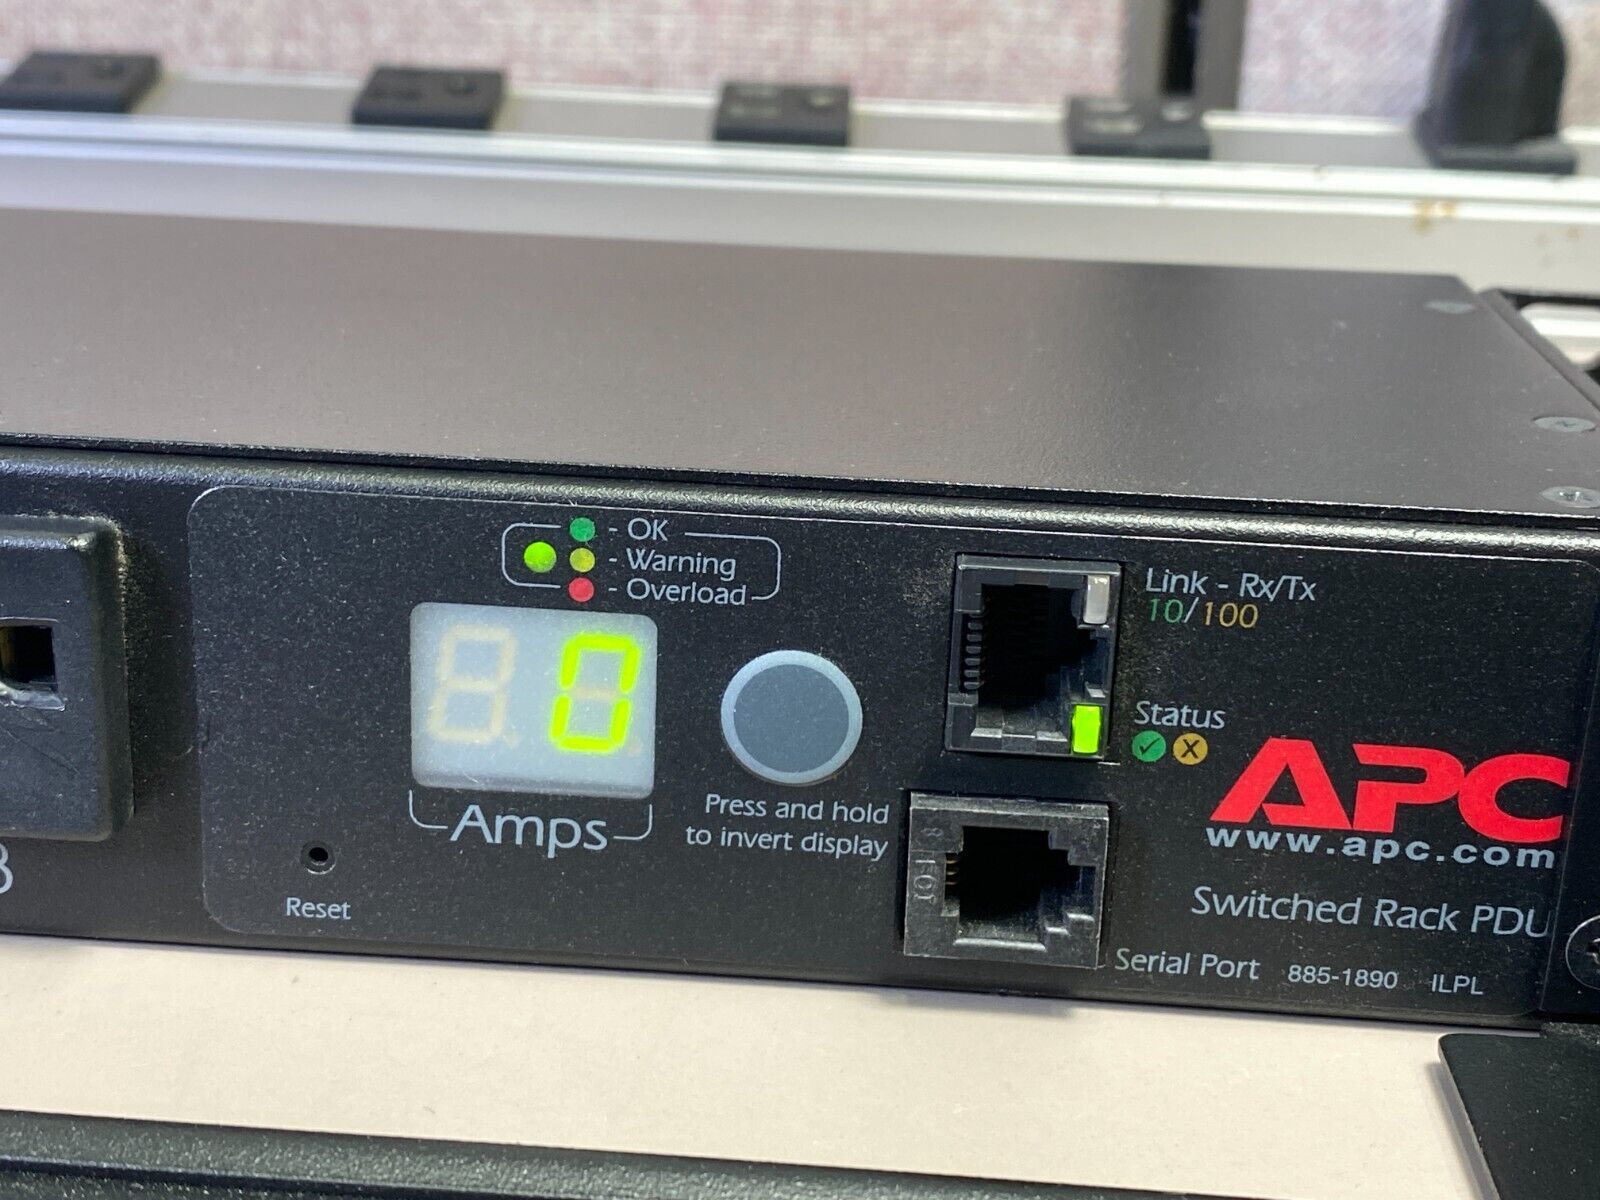 APC AP7901 SWITCHED RACK PDU POWER 20A 120V 8-OUTLETS